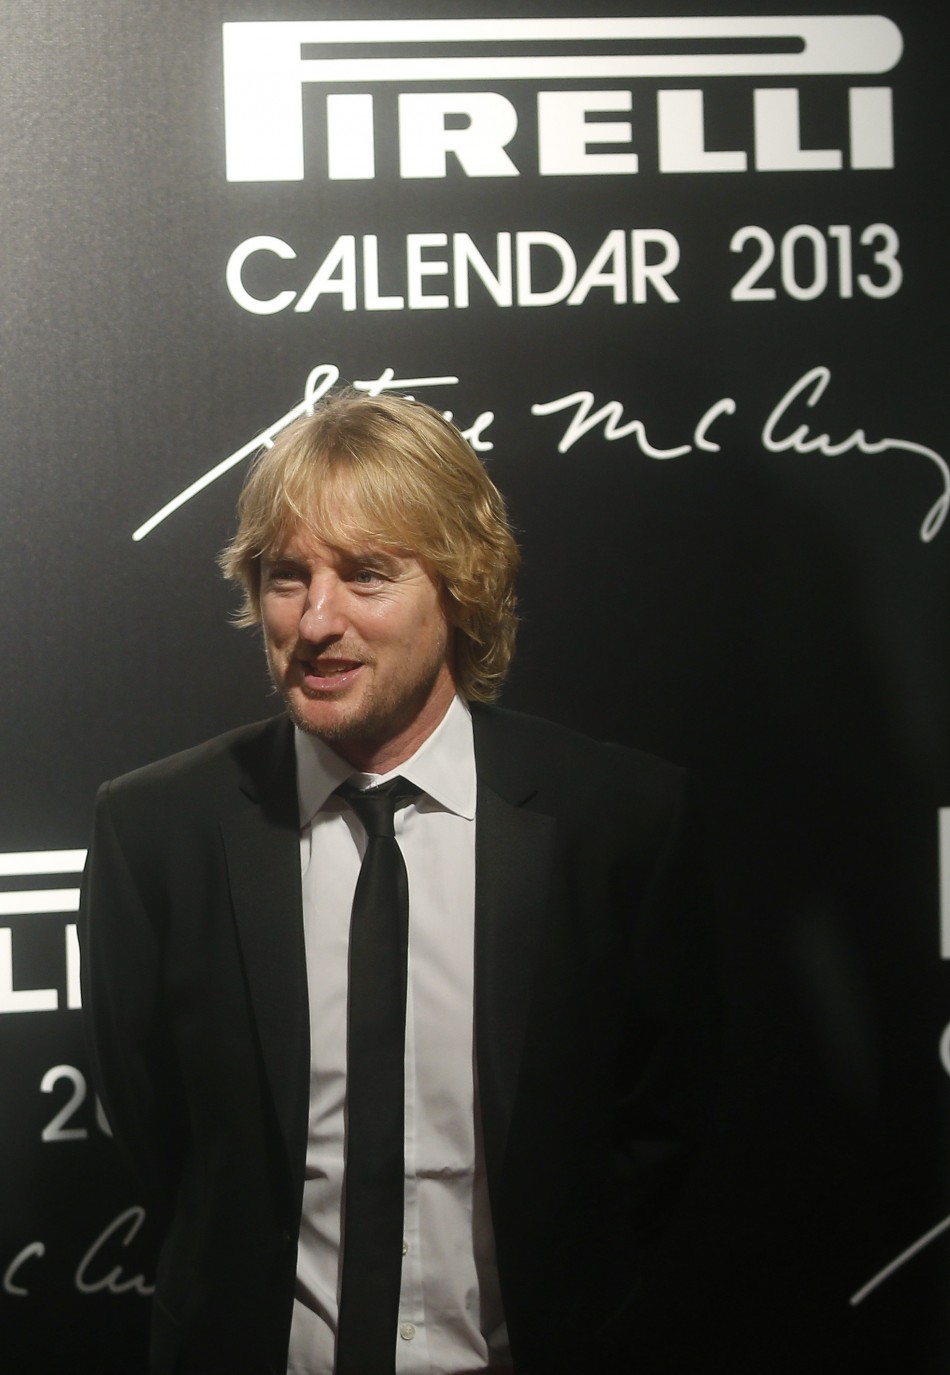 U.S. actor Owen Wilson poses during the arrivals for the launch of the Pirelli Calendar 2013 in Rio de Janeiro